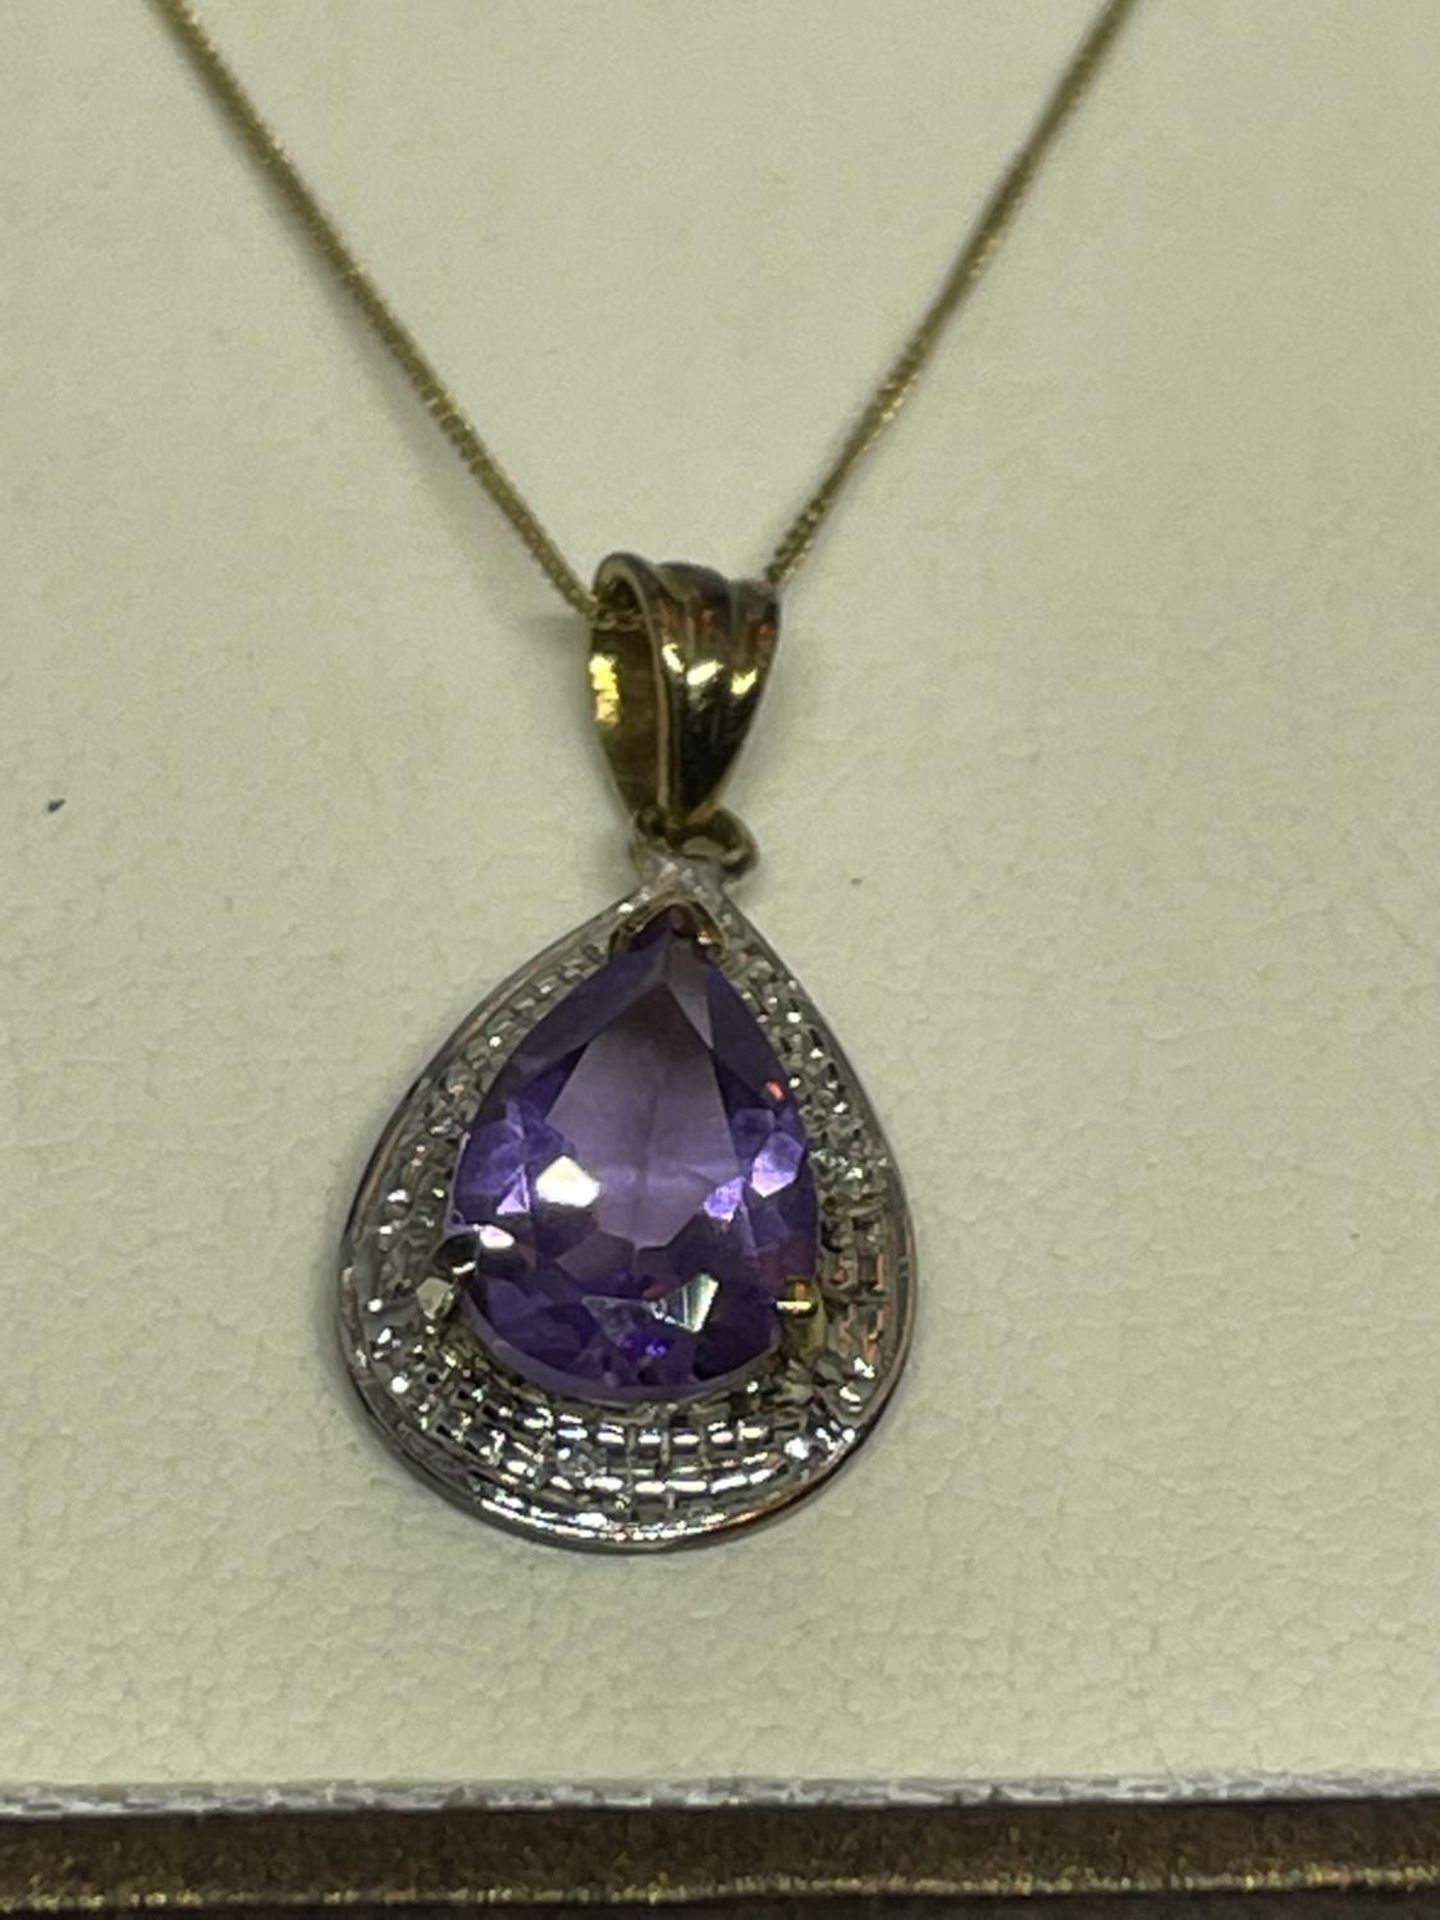 A 9 CARAT GOLD NECKLACE WITH AN AMETHYST PENDANT IN A PRESENTATION BOX - Image 2 of 2